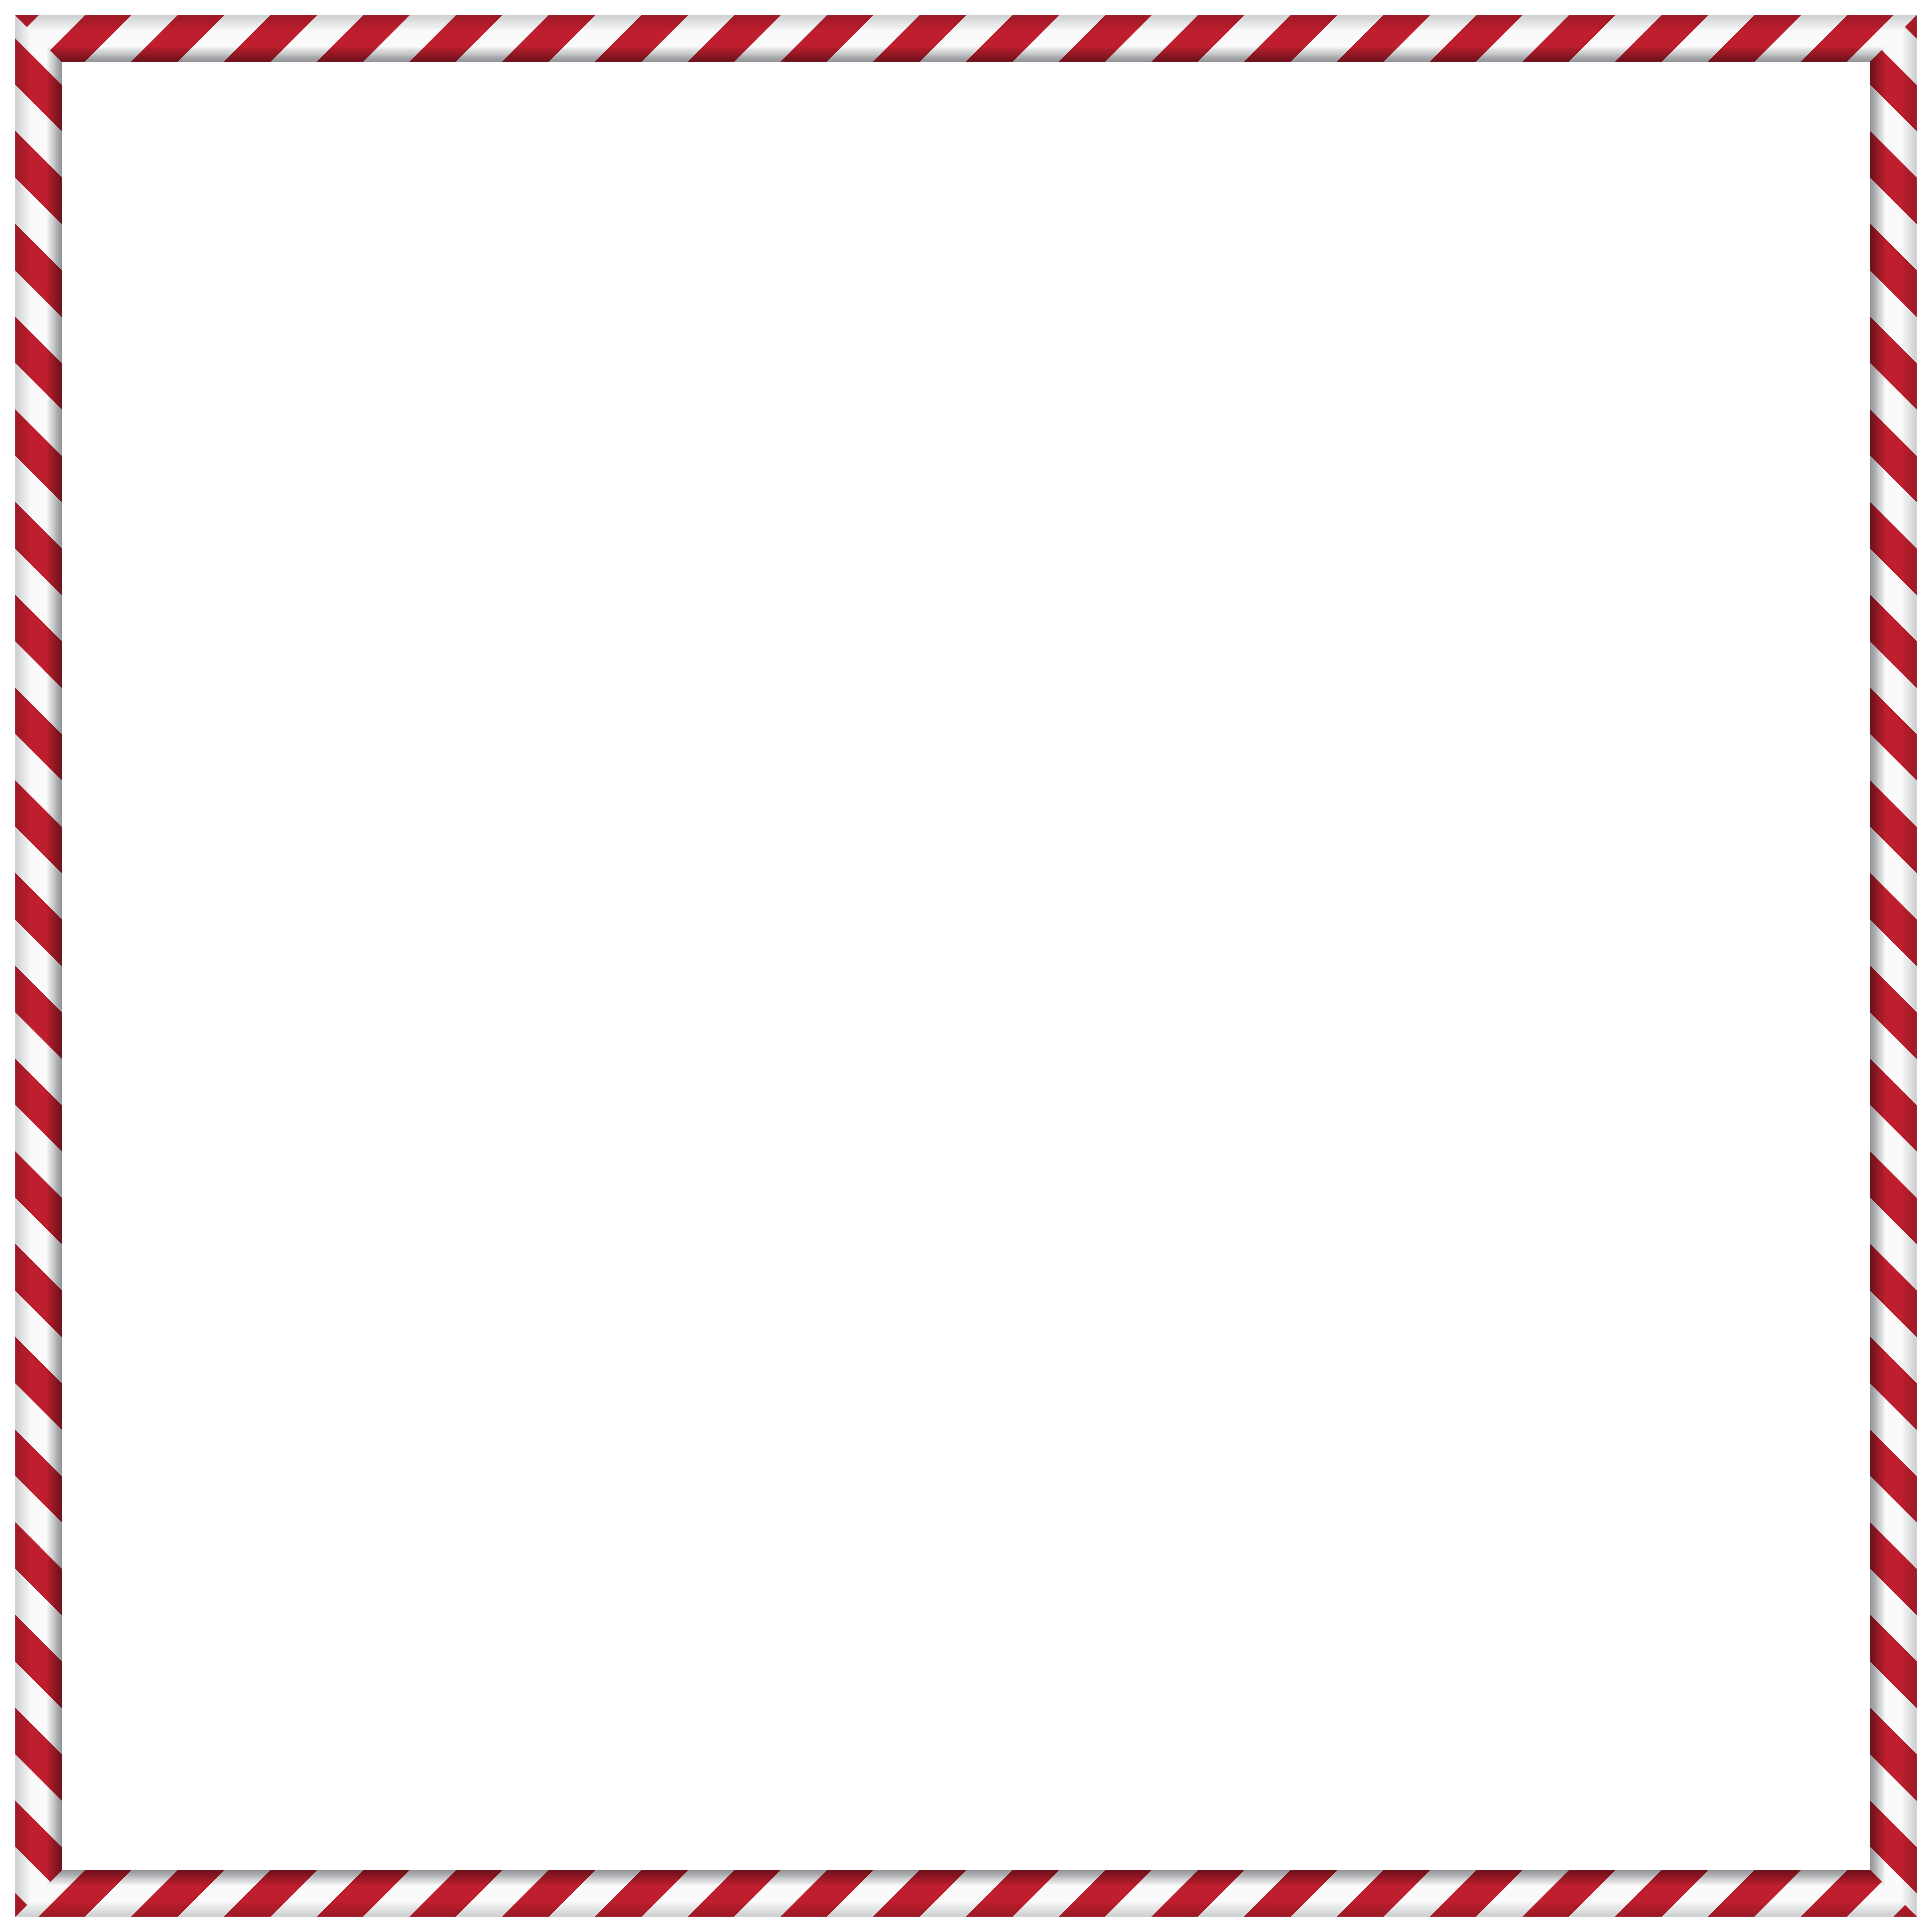 Candy Cane Border PNG Clip Art.